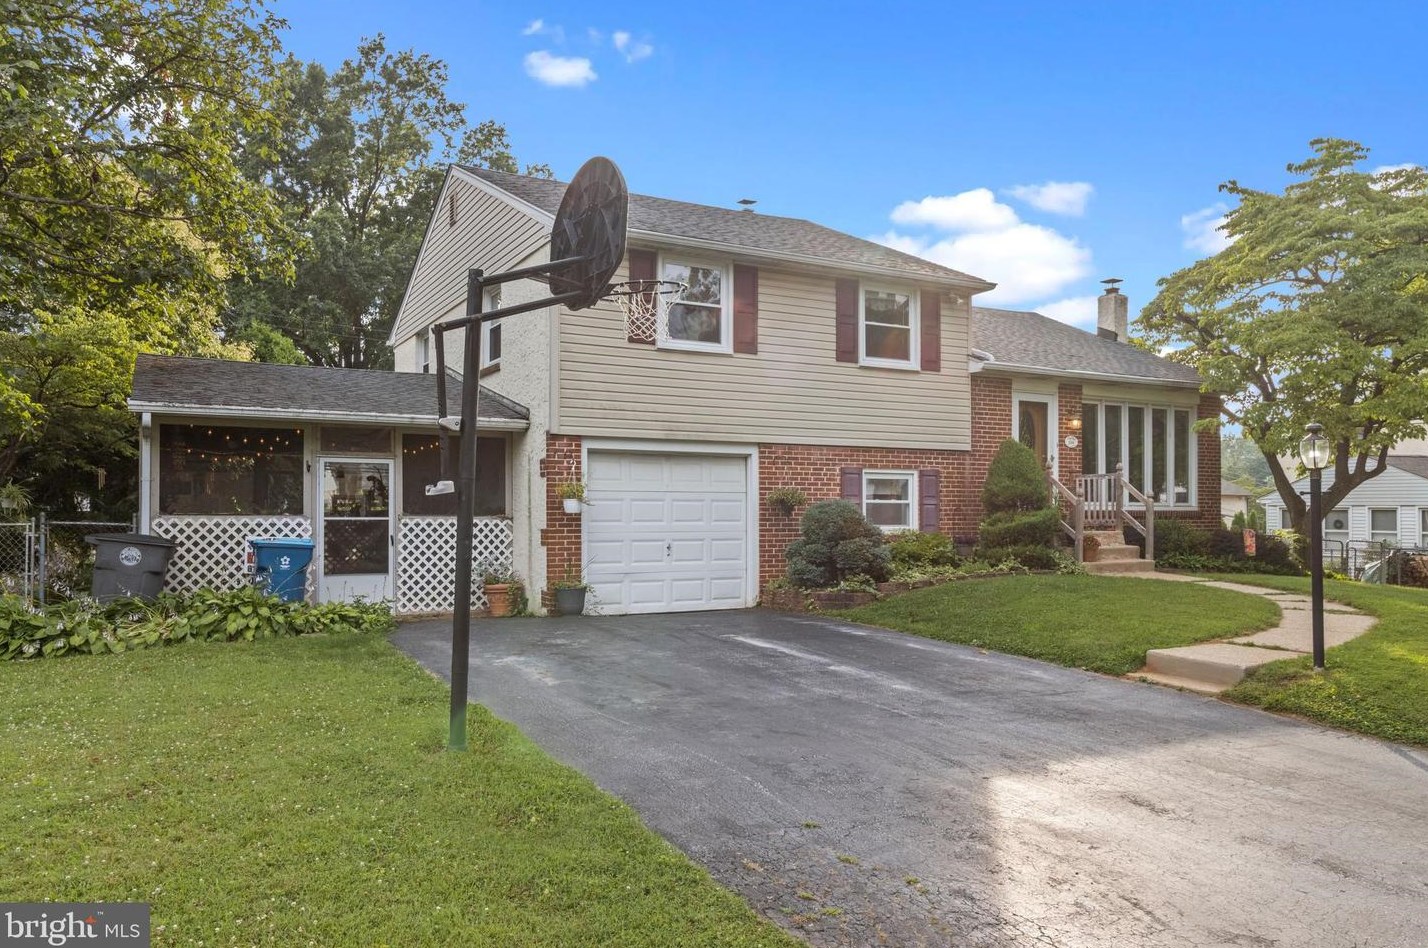 114 Glen Ave, West Chester, PA 19382